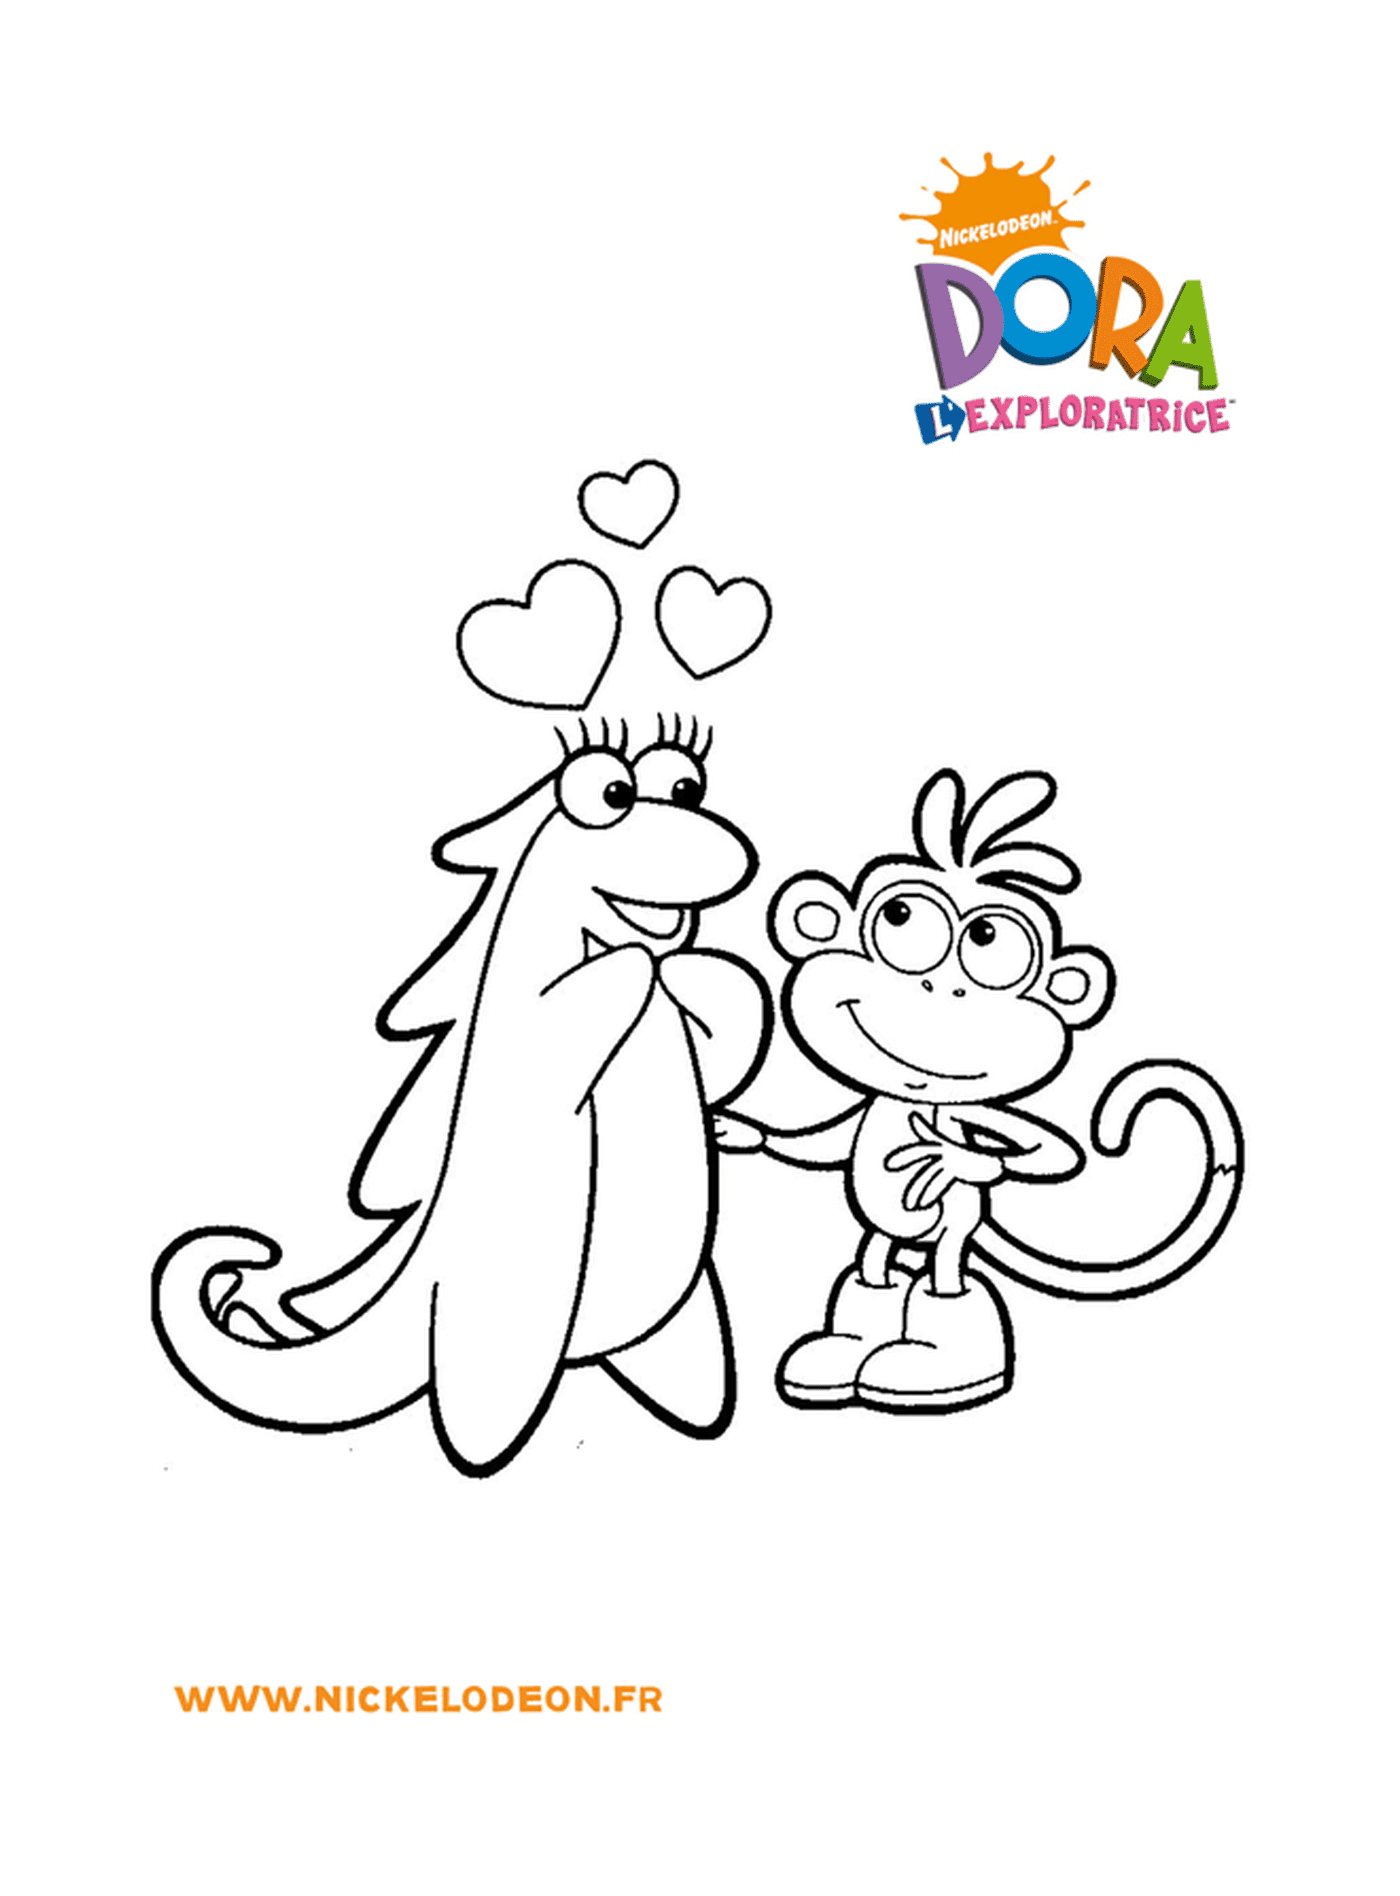  Dora and Babouche discover love in the heart of their adventures 